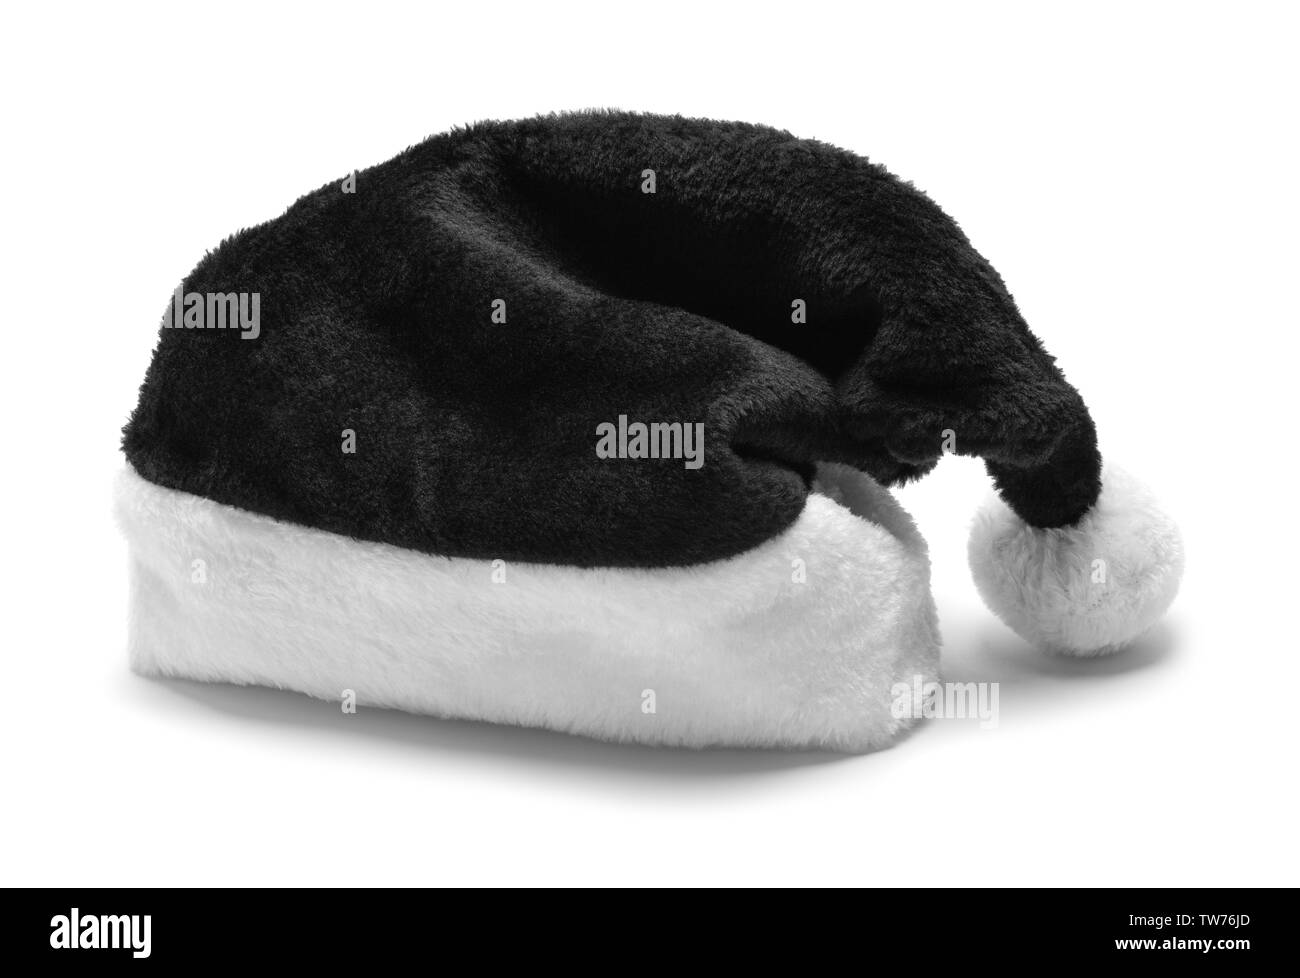 Black and White Santa Hat Front View Isolated on White. Stock Photo